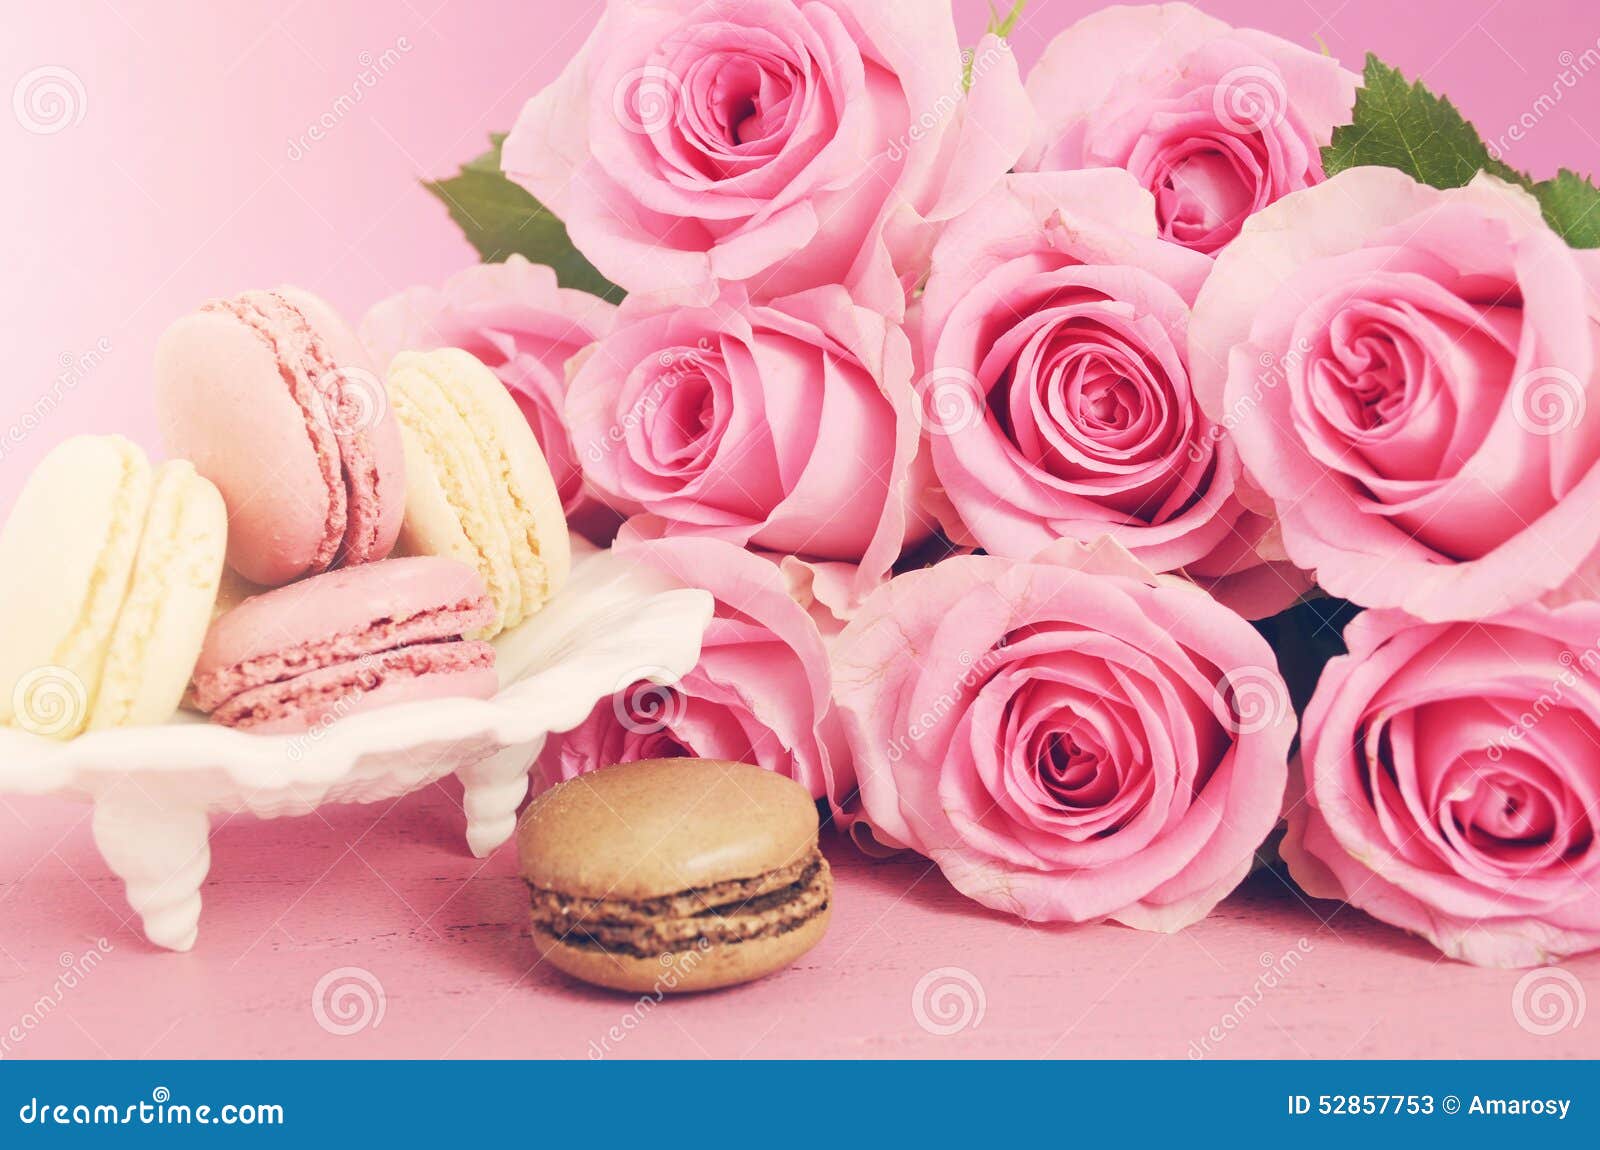 Happy Mothers Day Pink Roses And Macarons. Stock Image  Image of meringue, mummy 